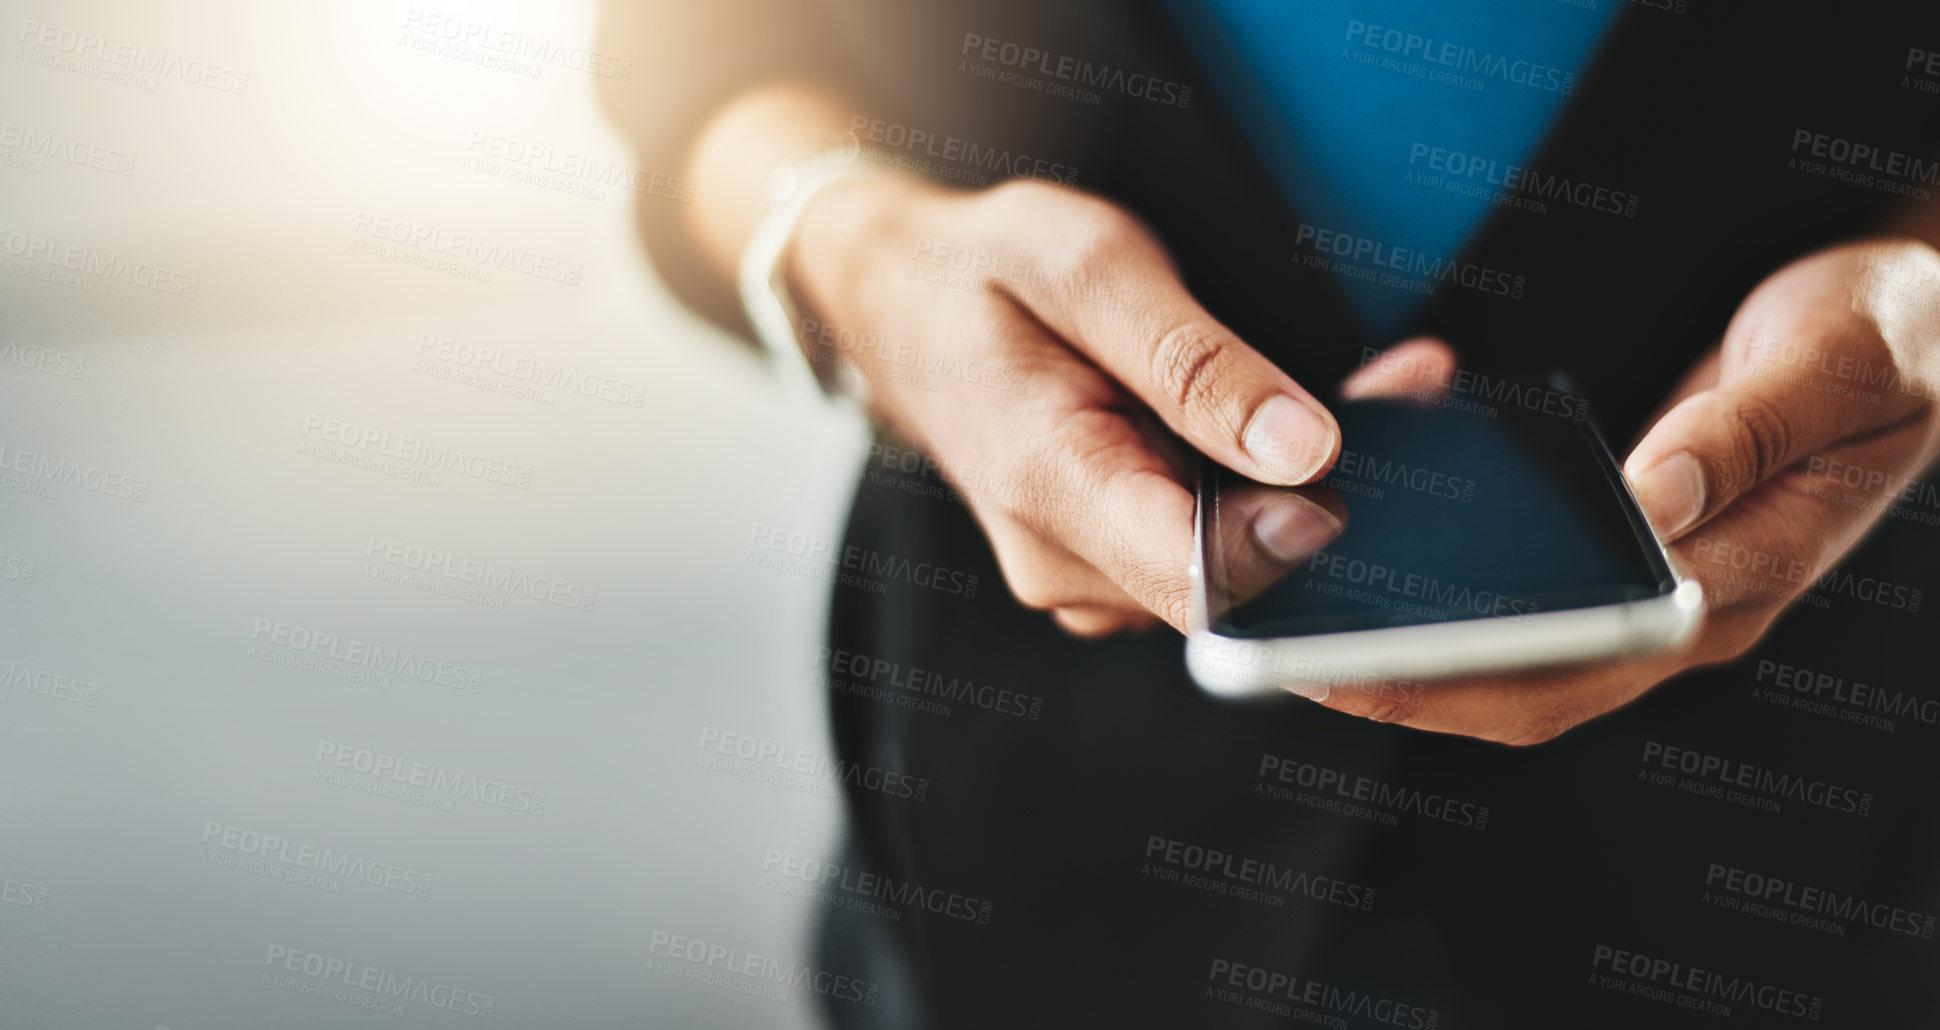 Buy stock photo Trendy business women texting on phone, reading text messages and looking at latest trends on social media. Marketing professional browsing internet on cellphone or online app with copy space closeup